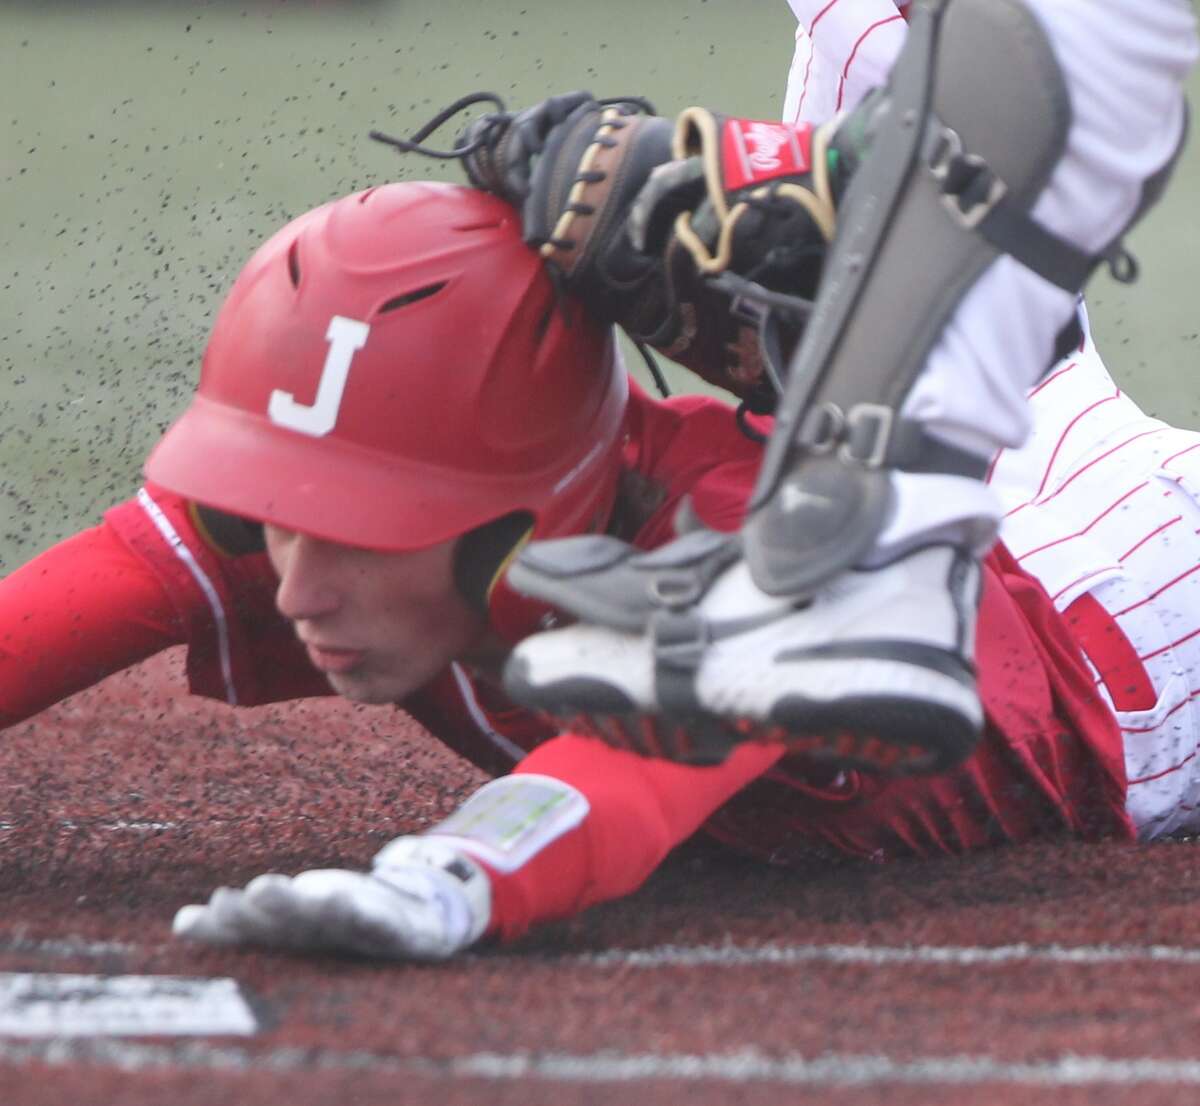 Jacksonville's Anderson Decker is tagged out at home plate during the Crimsons' win over Macomb on Wednesday at Future Champions Sports Complex in Jacksonville.